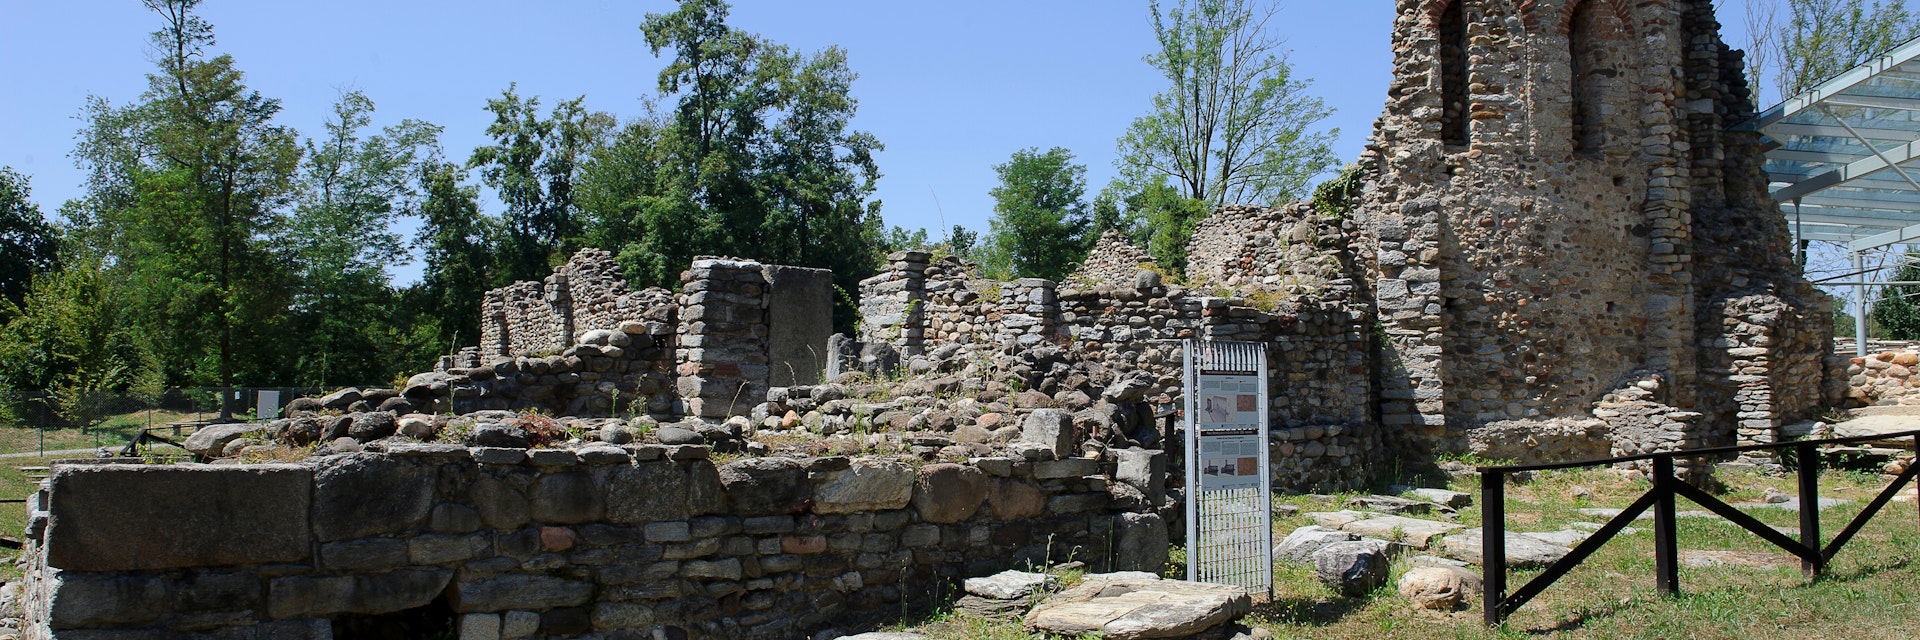 The archaeological area of Castelseprio with the ruins of a village destroyed in the 13th century. 